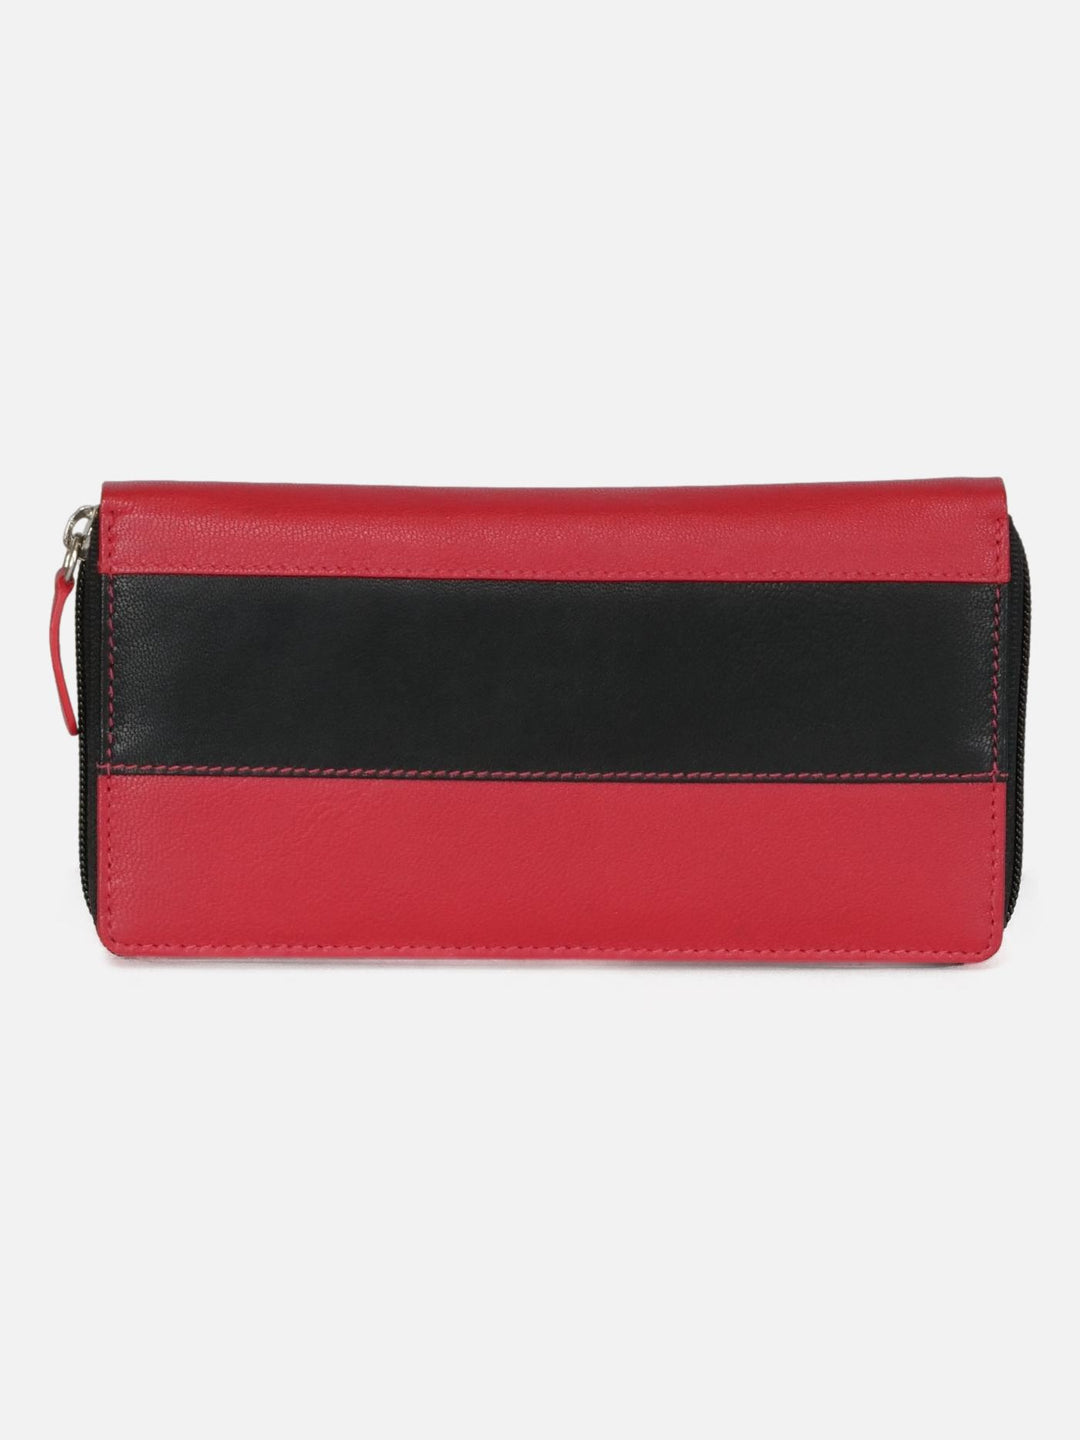 1515 Wallet - Goat Leather - Accesories - Black & Red